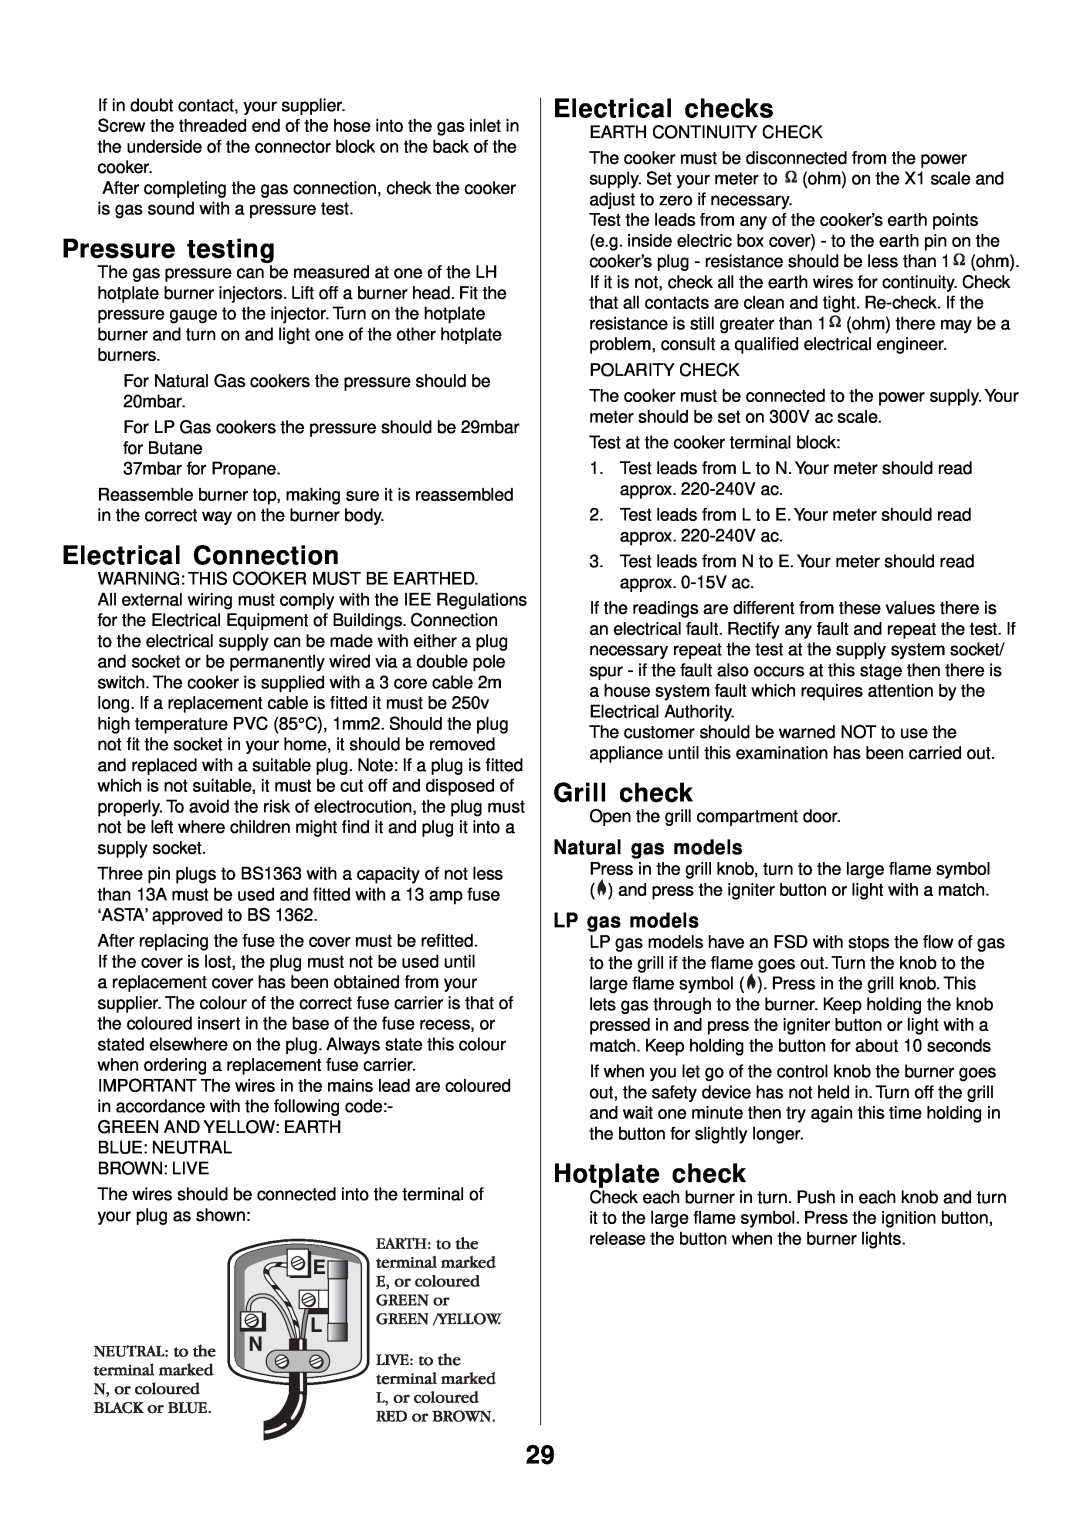 Rangemaster 90 Gas manual Pressure testing, Electrical Connection, Electrical checks, Grill check, Hotplate check 